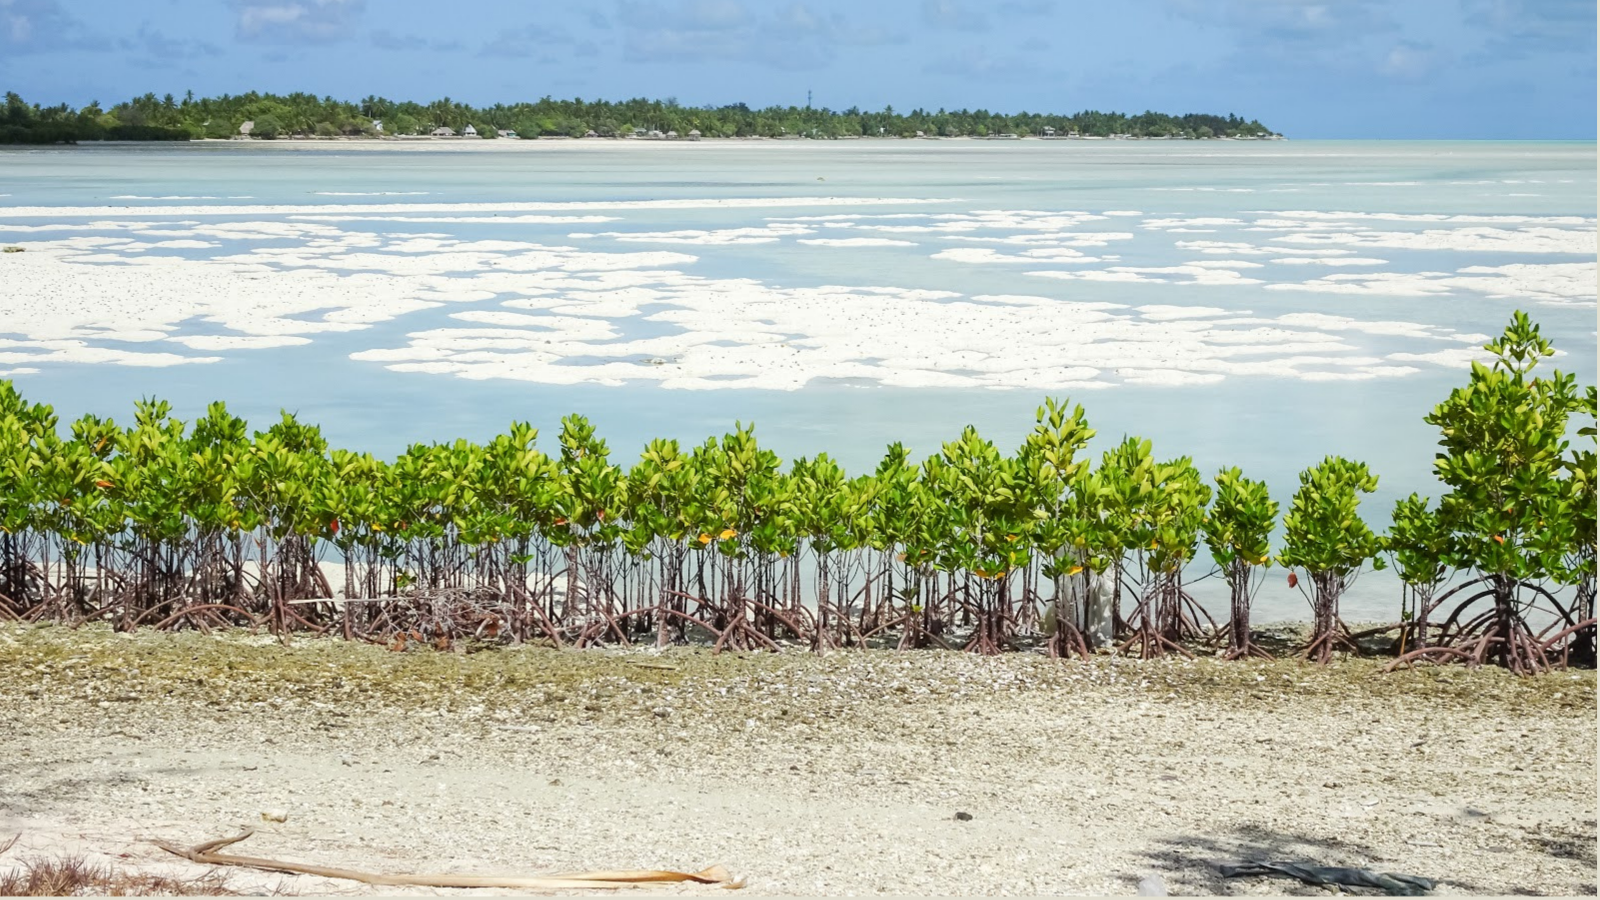 row of trees saving a shoreline in kiribati from being taken by ocean in the body of the image